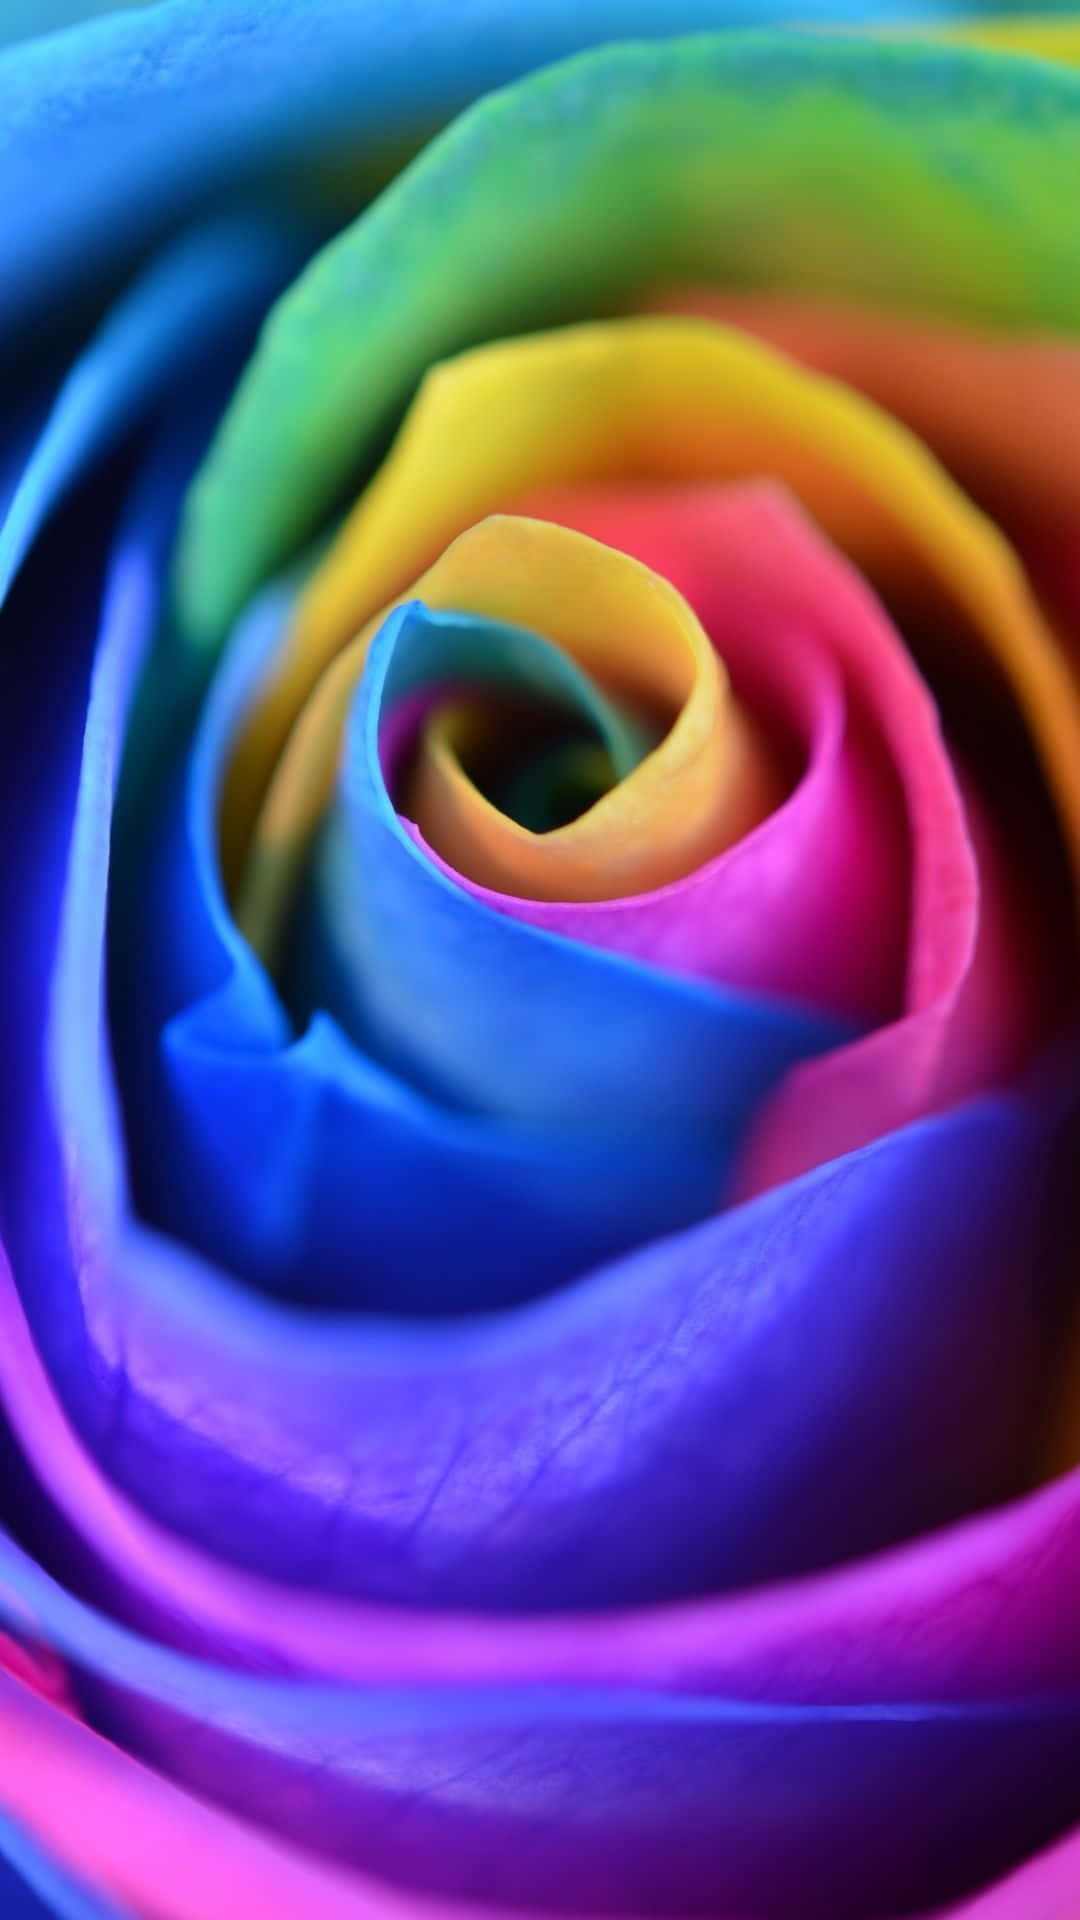 Add a burst of color to your smartphone with this Rainbow Flower iPhone wallpaper! Wallpaper